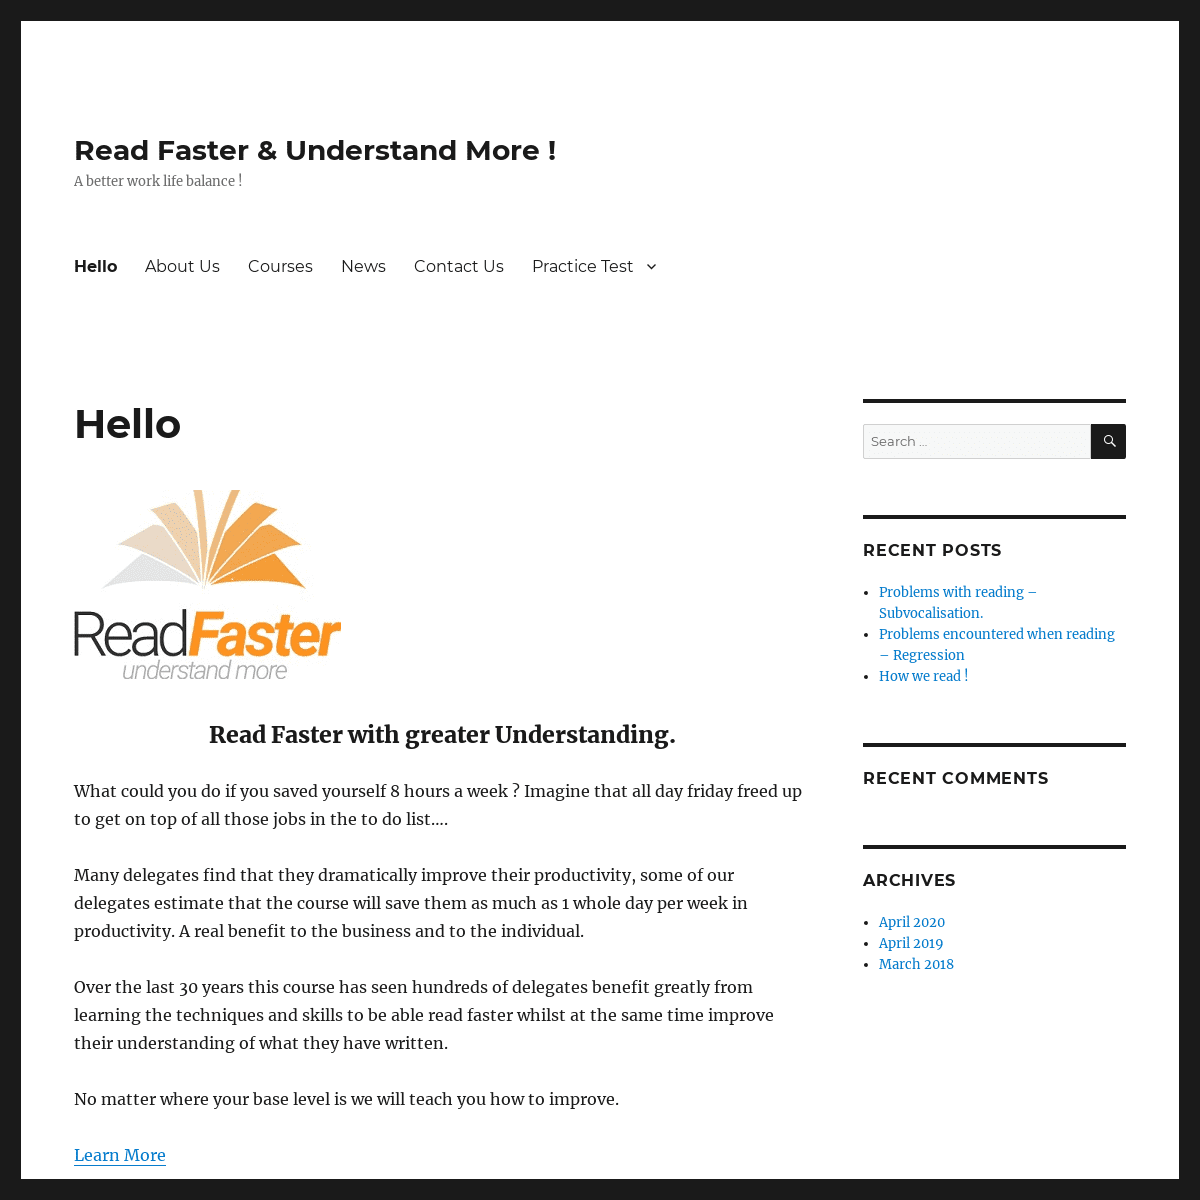 A complete backup of https://readfaster.co.uk